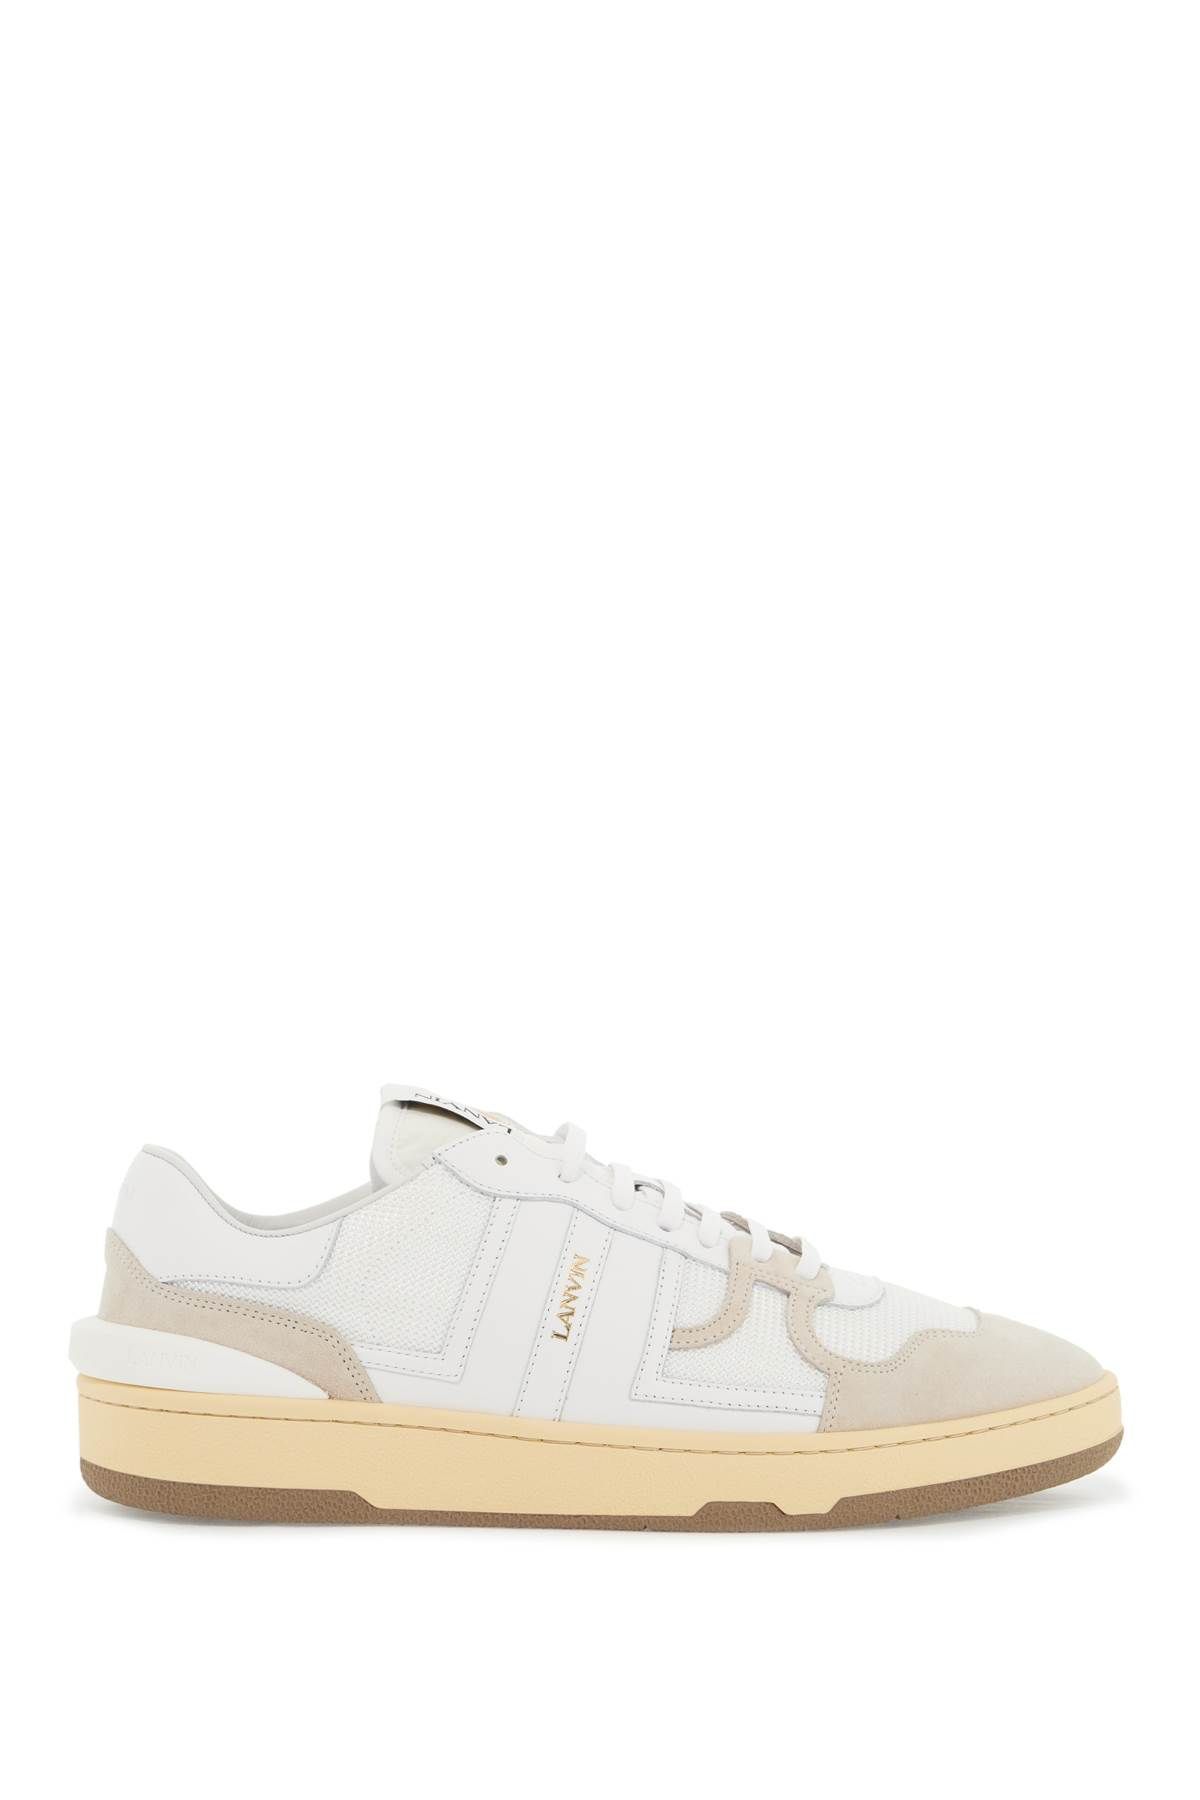 Lanvin LANVIN "mesh and leather clay sneakers with